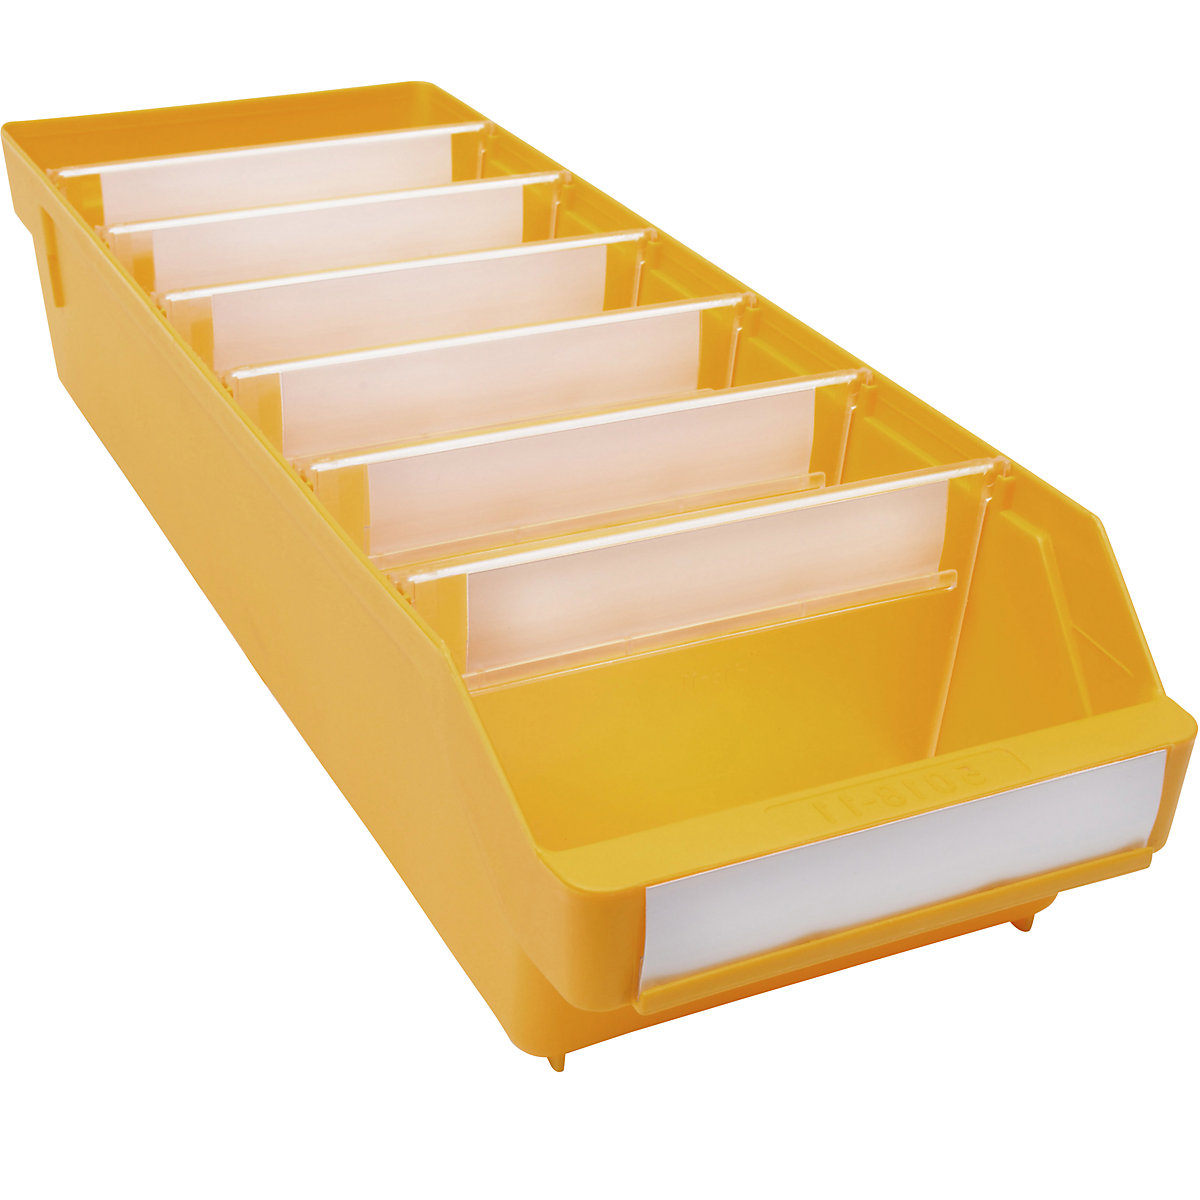 Shelf bin made of highly impact resistant polypropylene – STEMO, yellow, LxWxH 500 x 180 x 110 mm, pack of 20-10